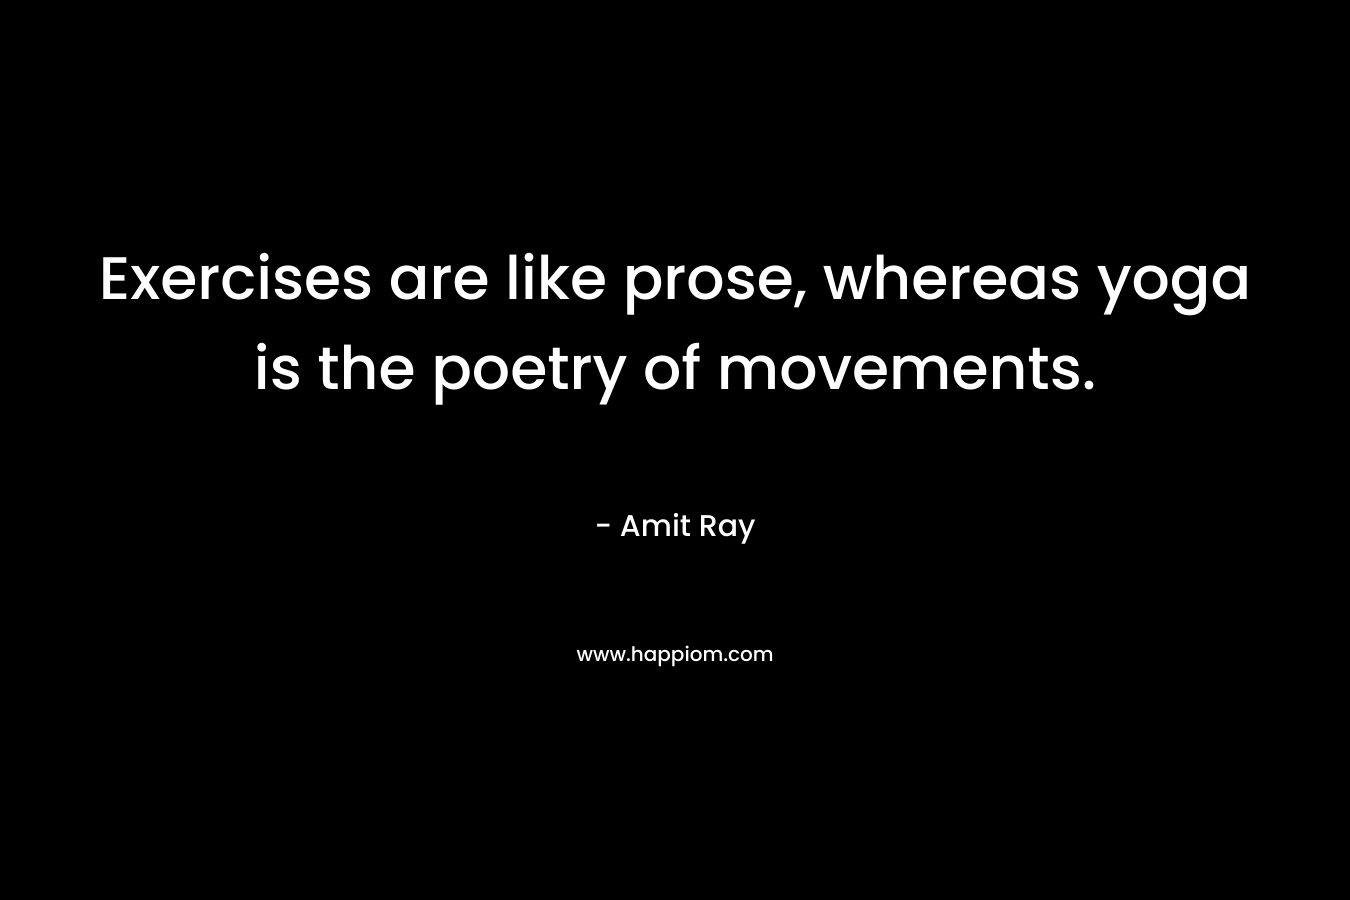 Exercises are like prose, whereas yoga is the poetry of movements. – Amit Ray